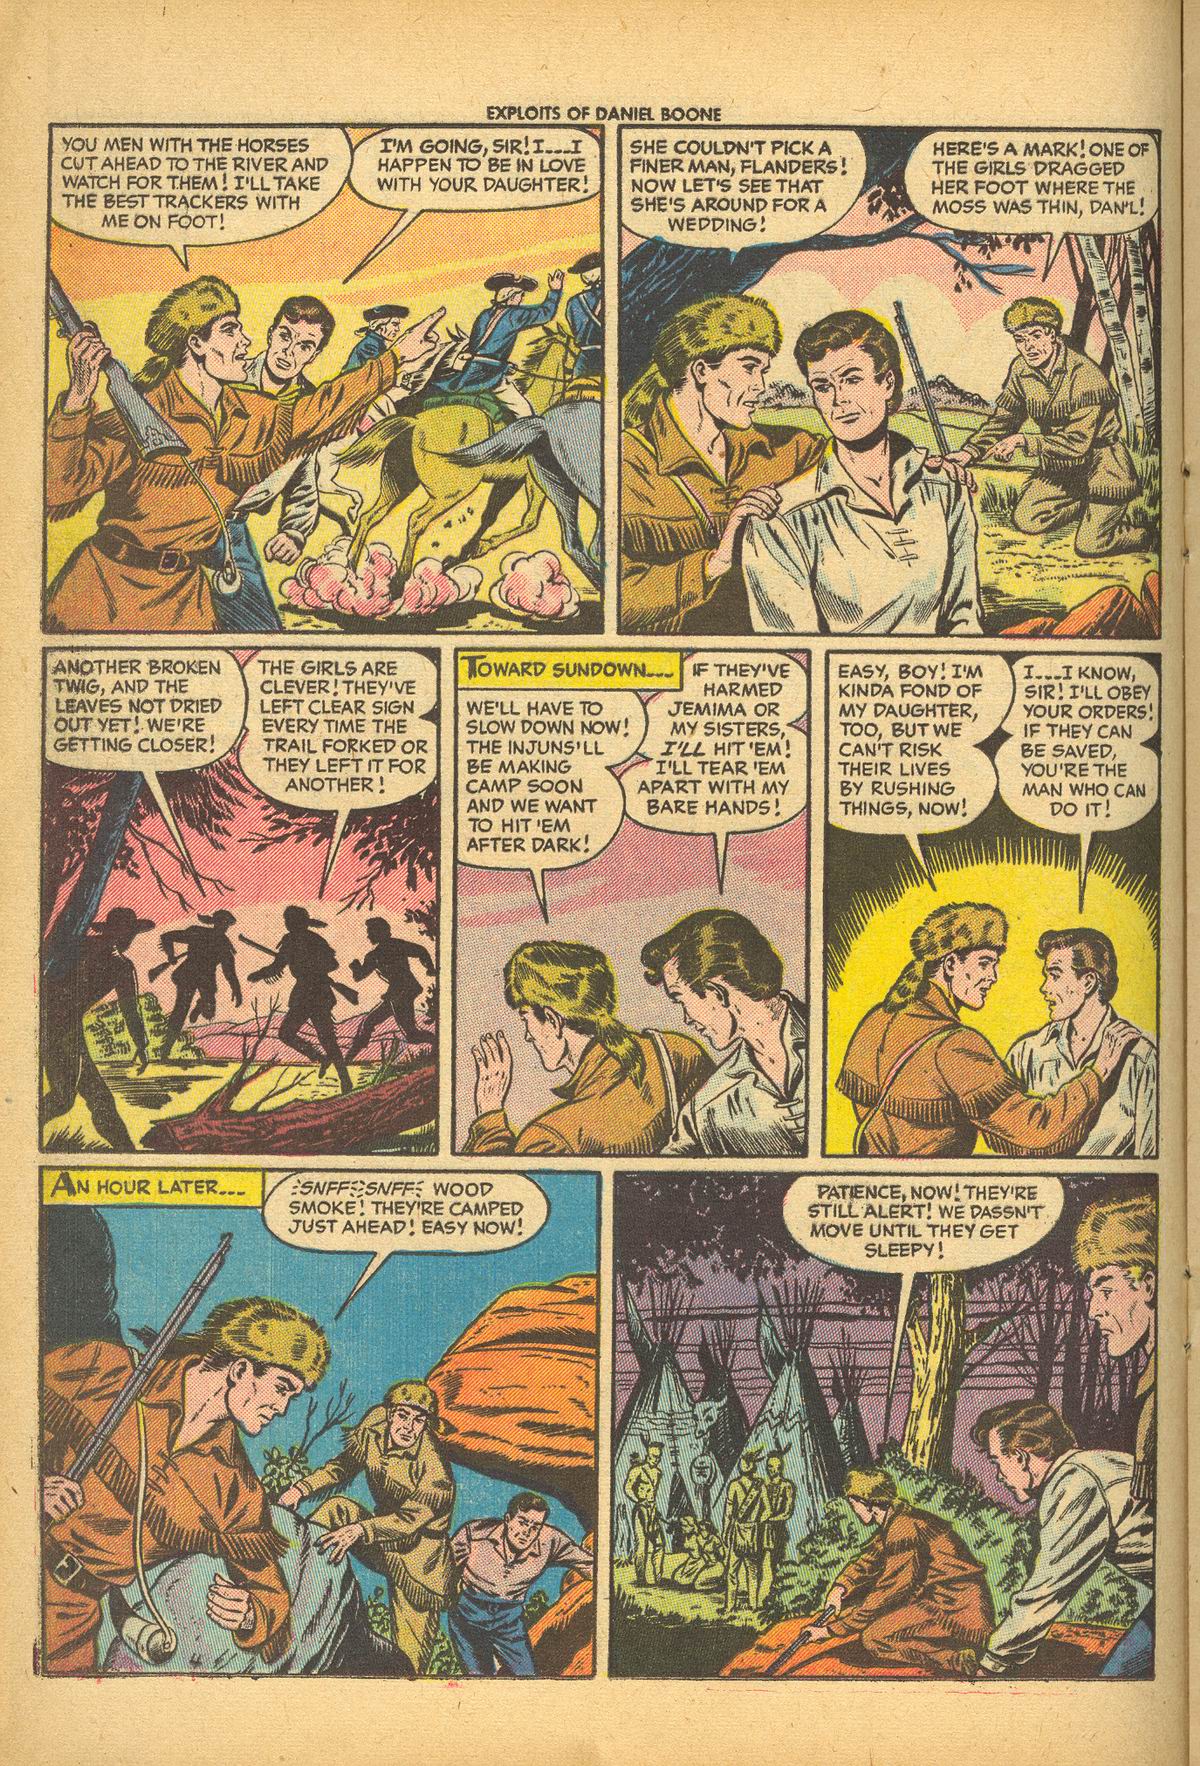 Read online Exploits of Daniel Boone comic -  Issue #3 - 16